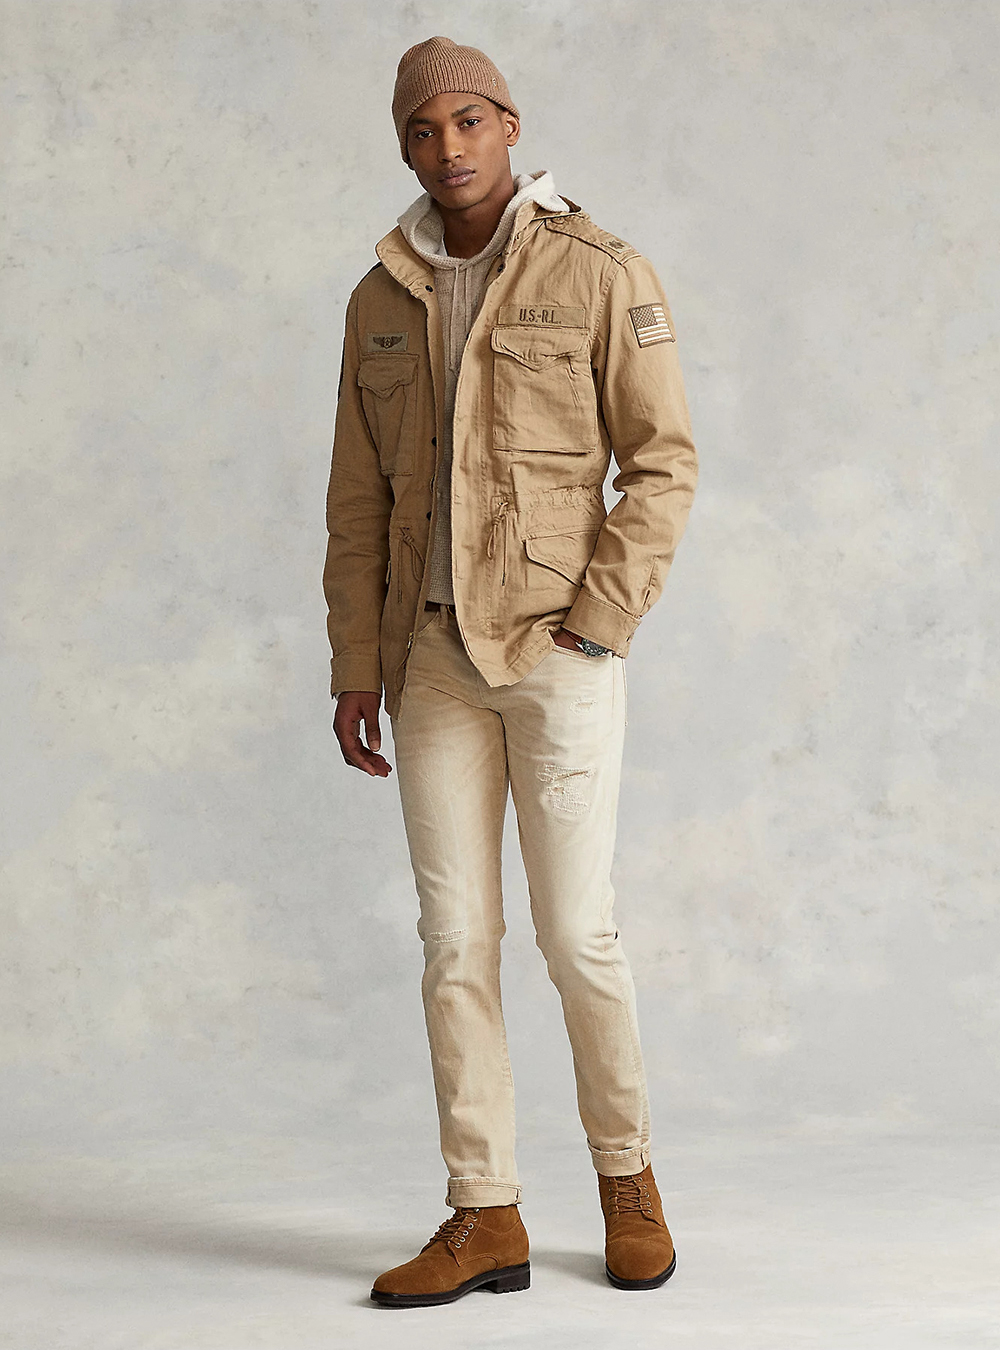 khaki jacket, taupe hoodie, tan jeans, and brown suede chukka boots